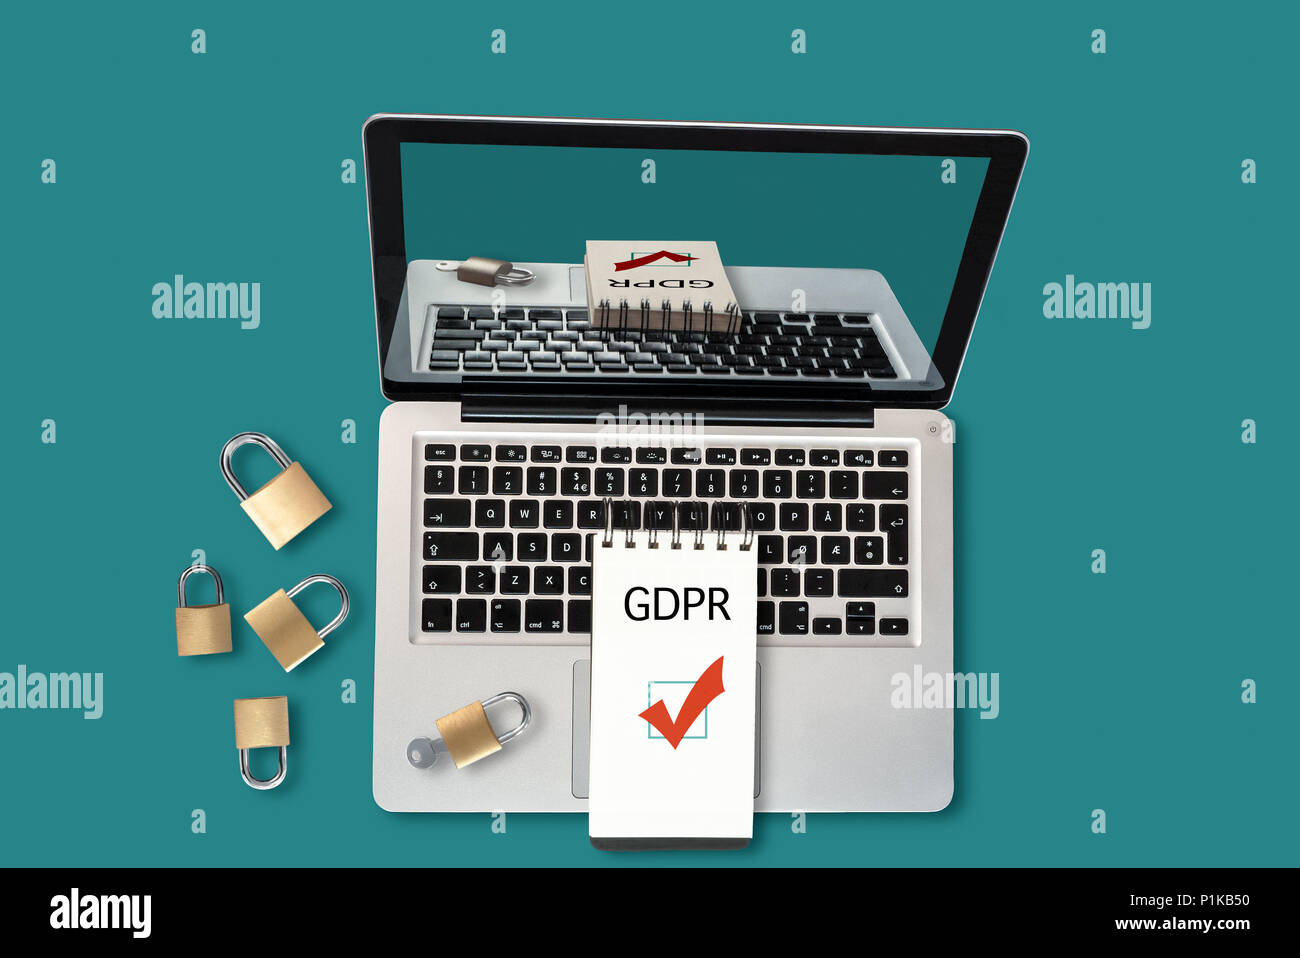 EU General Data Protection Regulation, GDPR, Concept - Rules to Comply for Secure Personal Data Storage and Handling Stock Photo